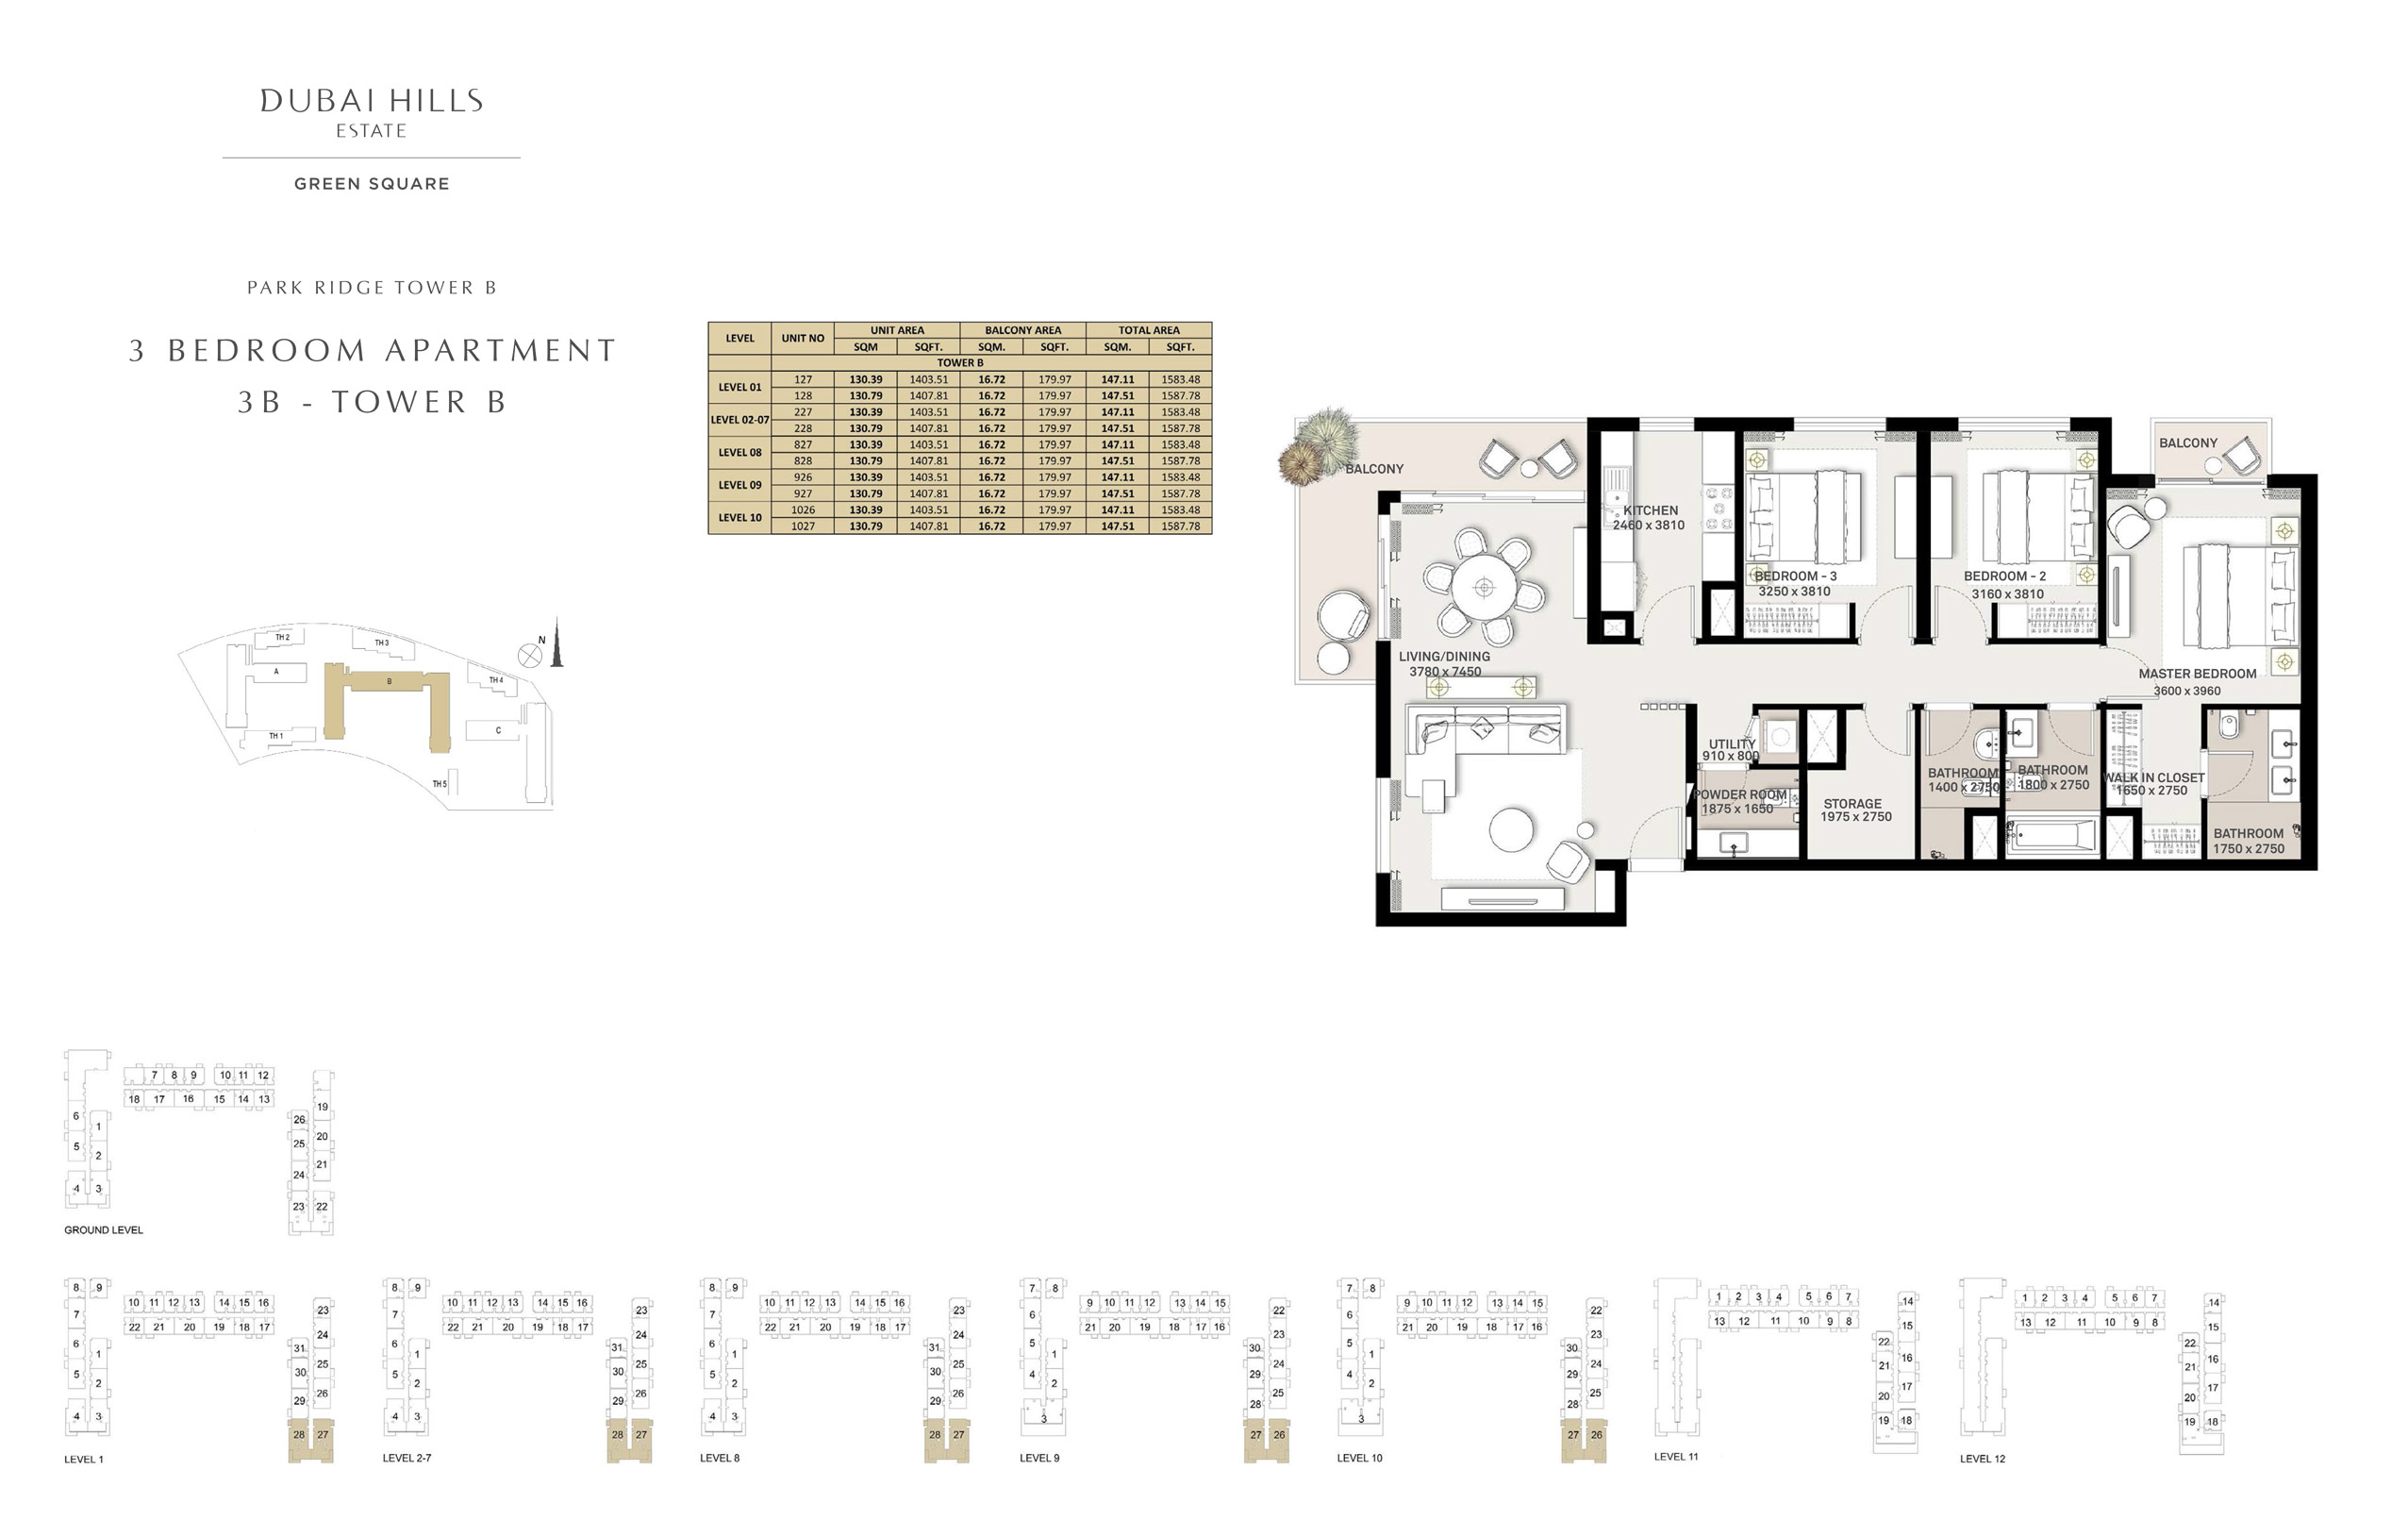 3 Bedroom Apartment 3 B - Tower B, Size 1583 sq ft